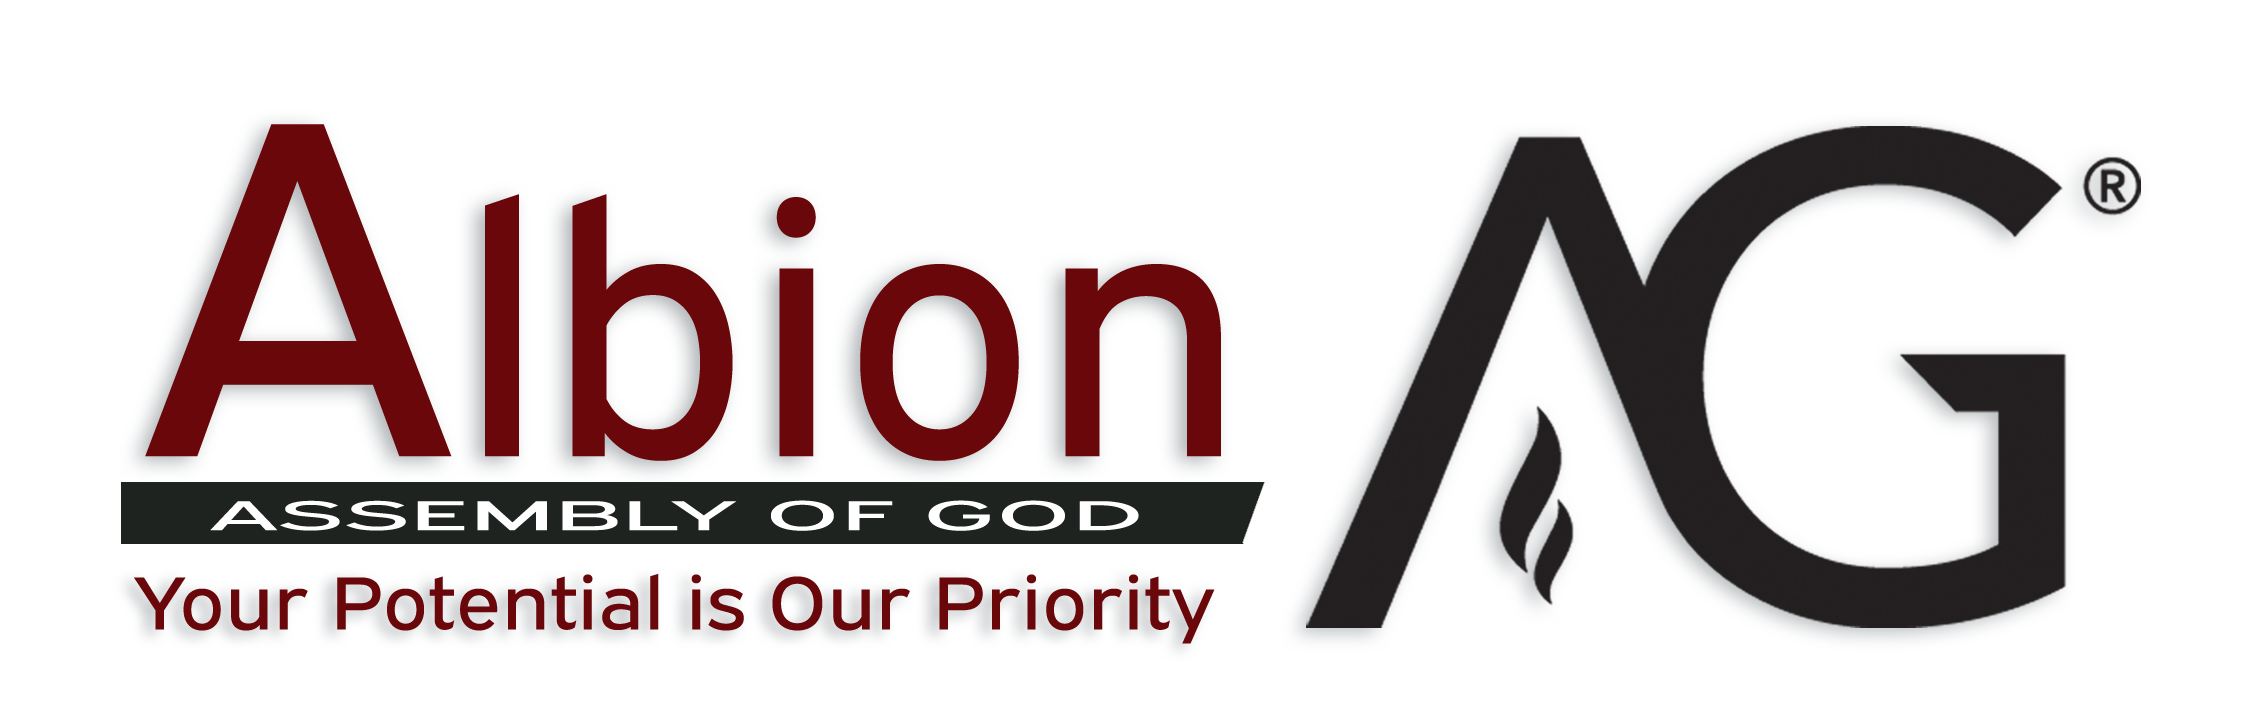 Albion Assembly of God